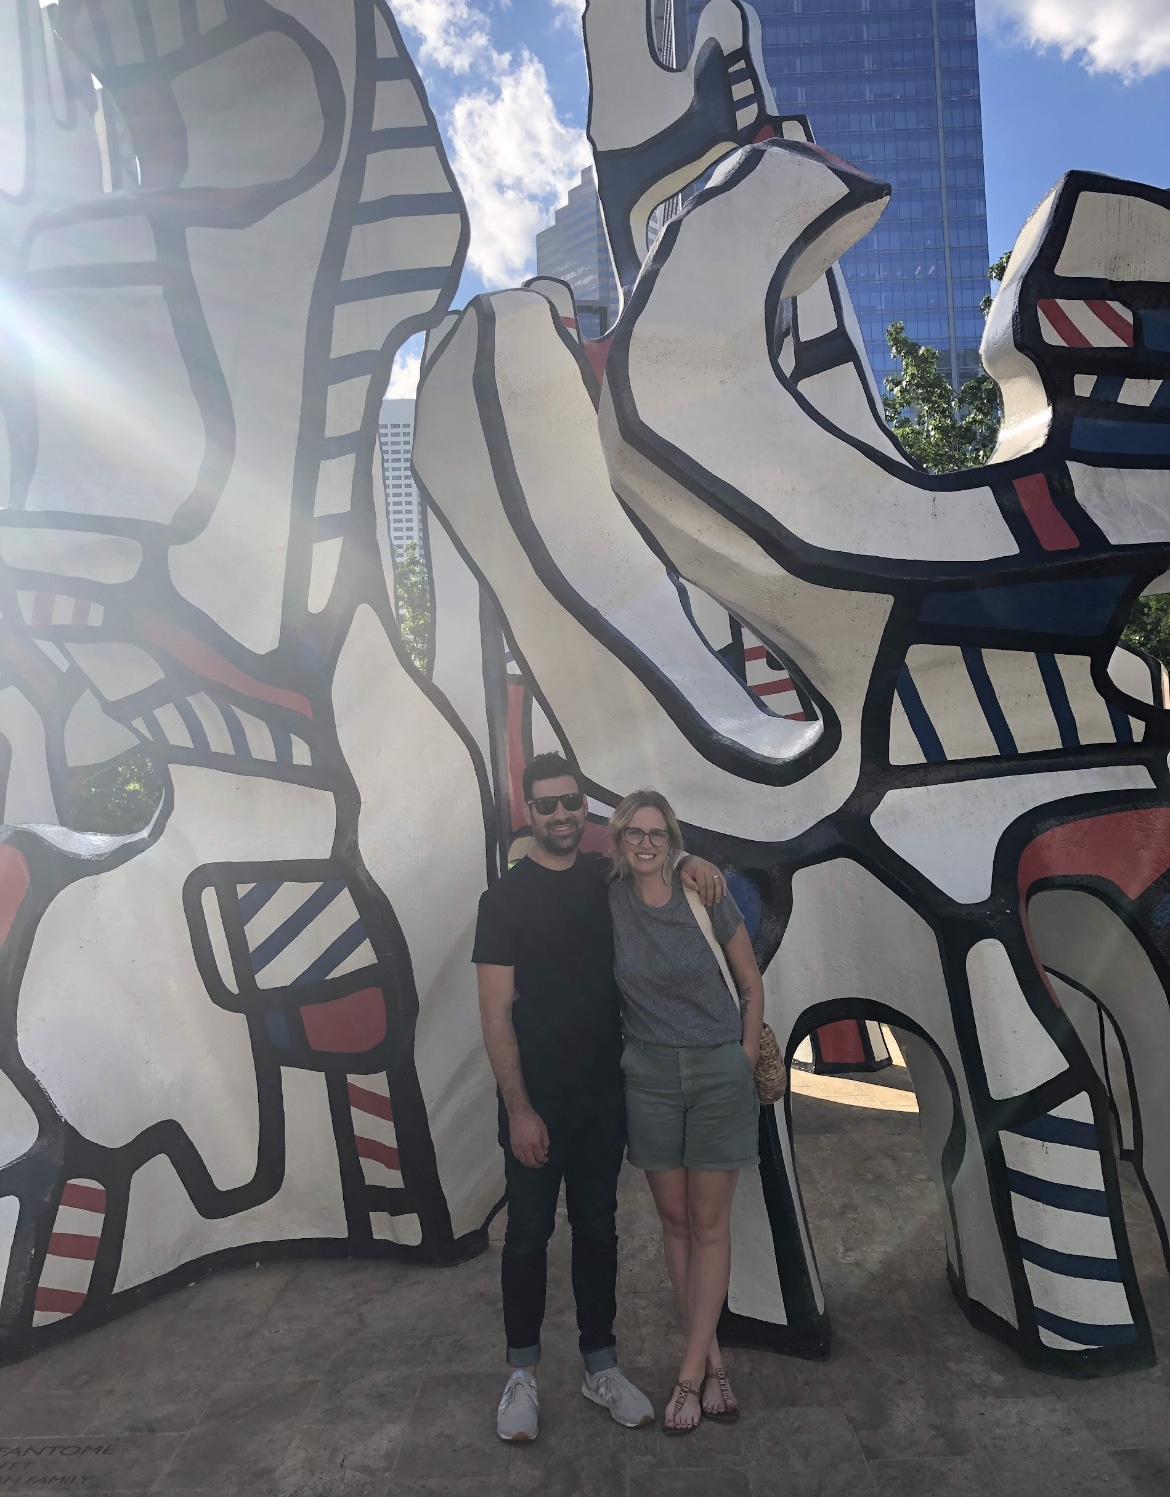 Lauren Hiser and her partner at the Dubuffet statue at Discovery Green